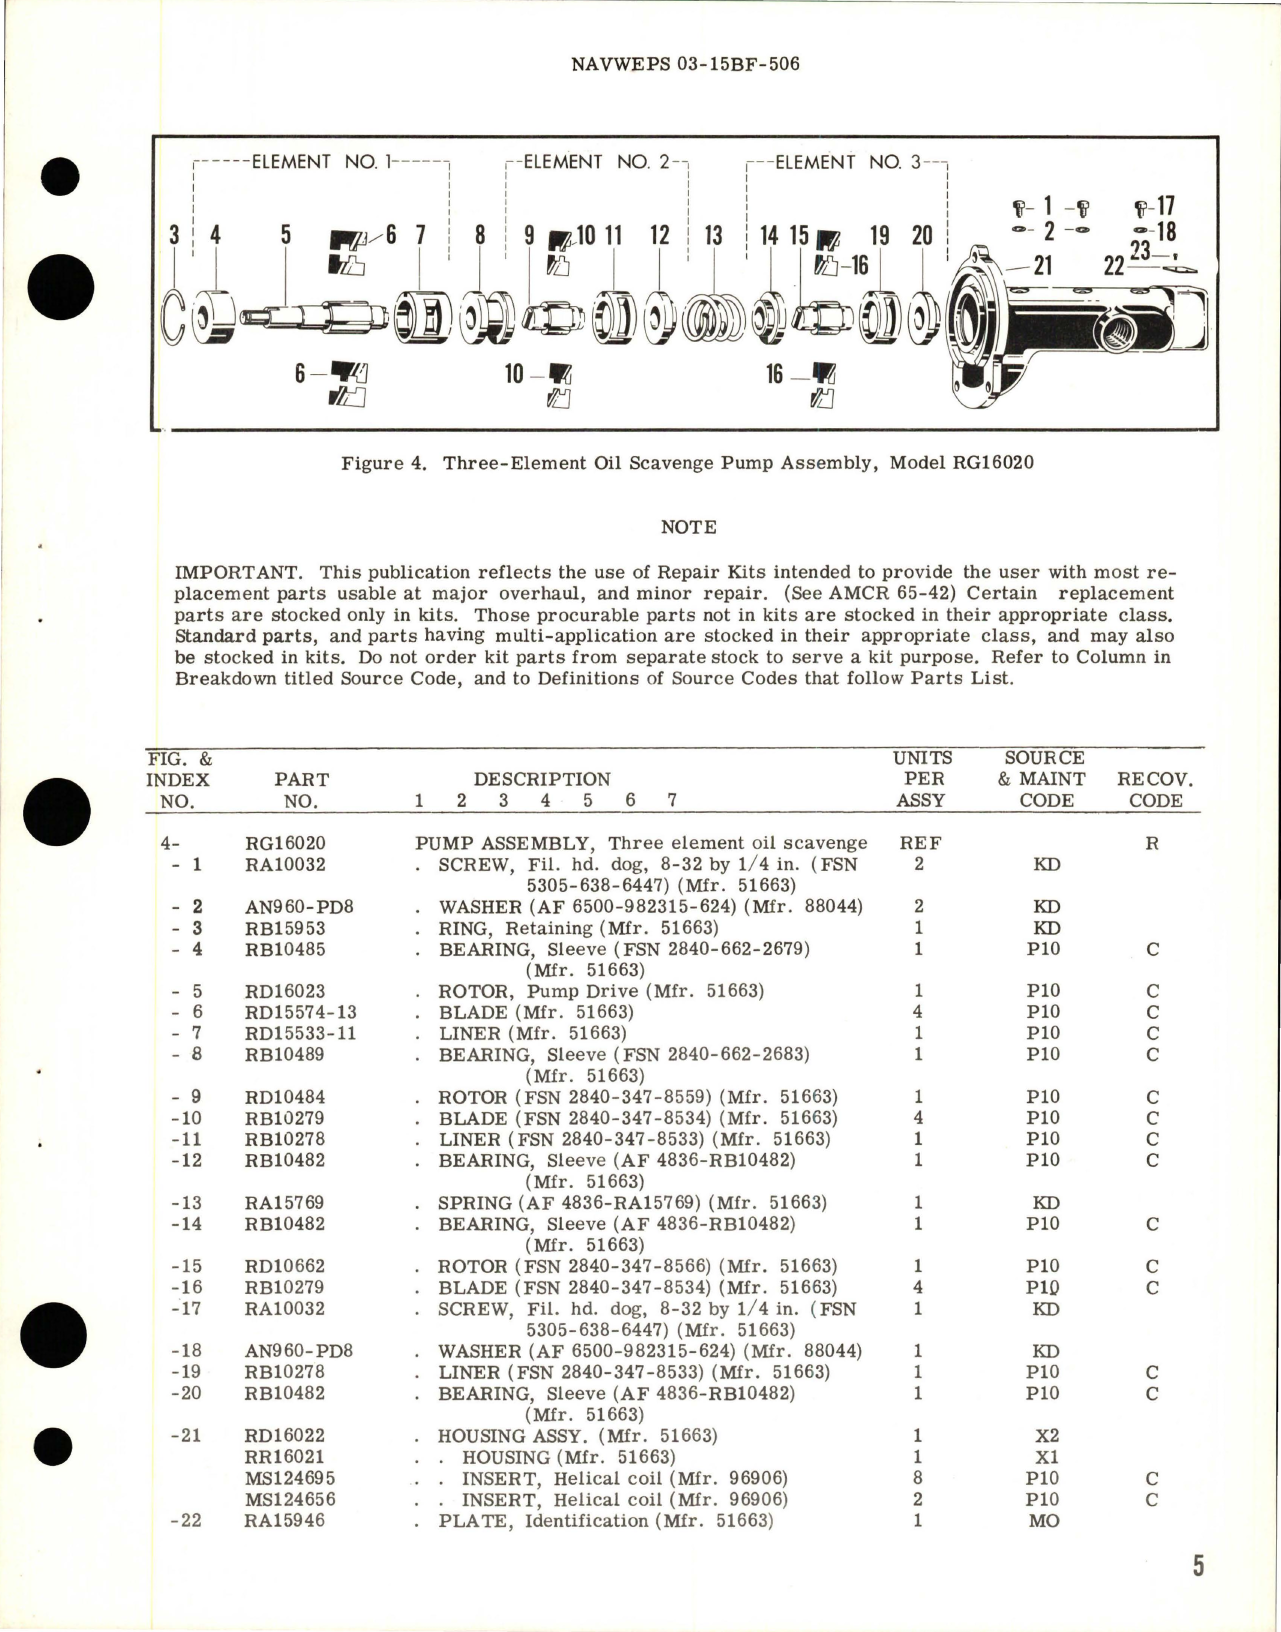 Sample page 5 from AirCorps Library document: Overhaul Instructions with Parts for Oil Scavenge Pump - Model RG-16020